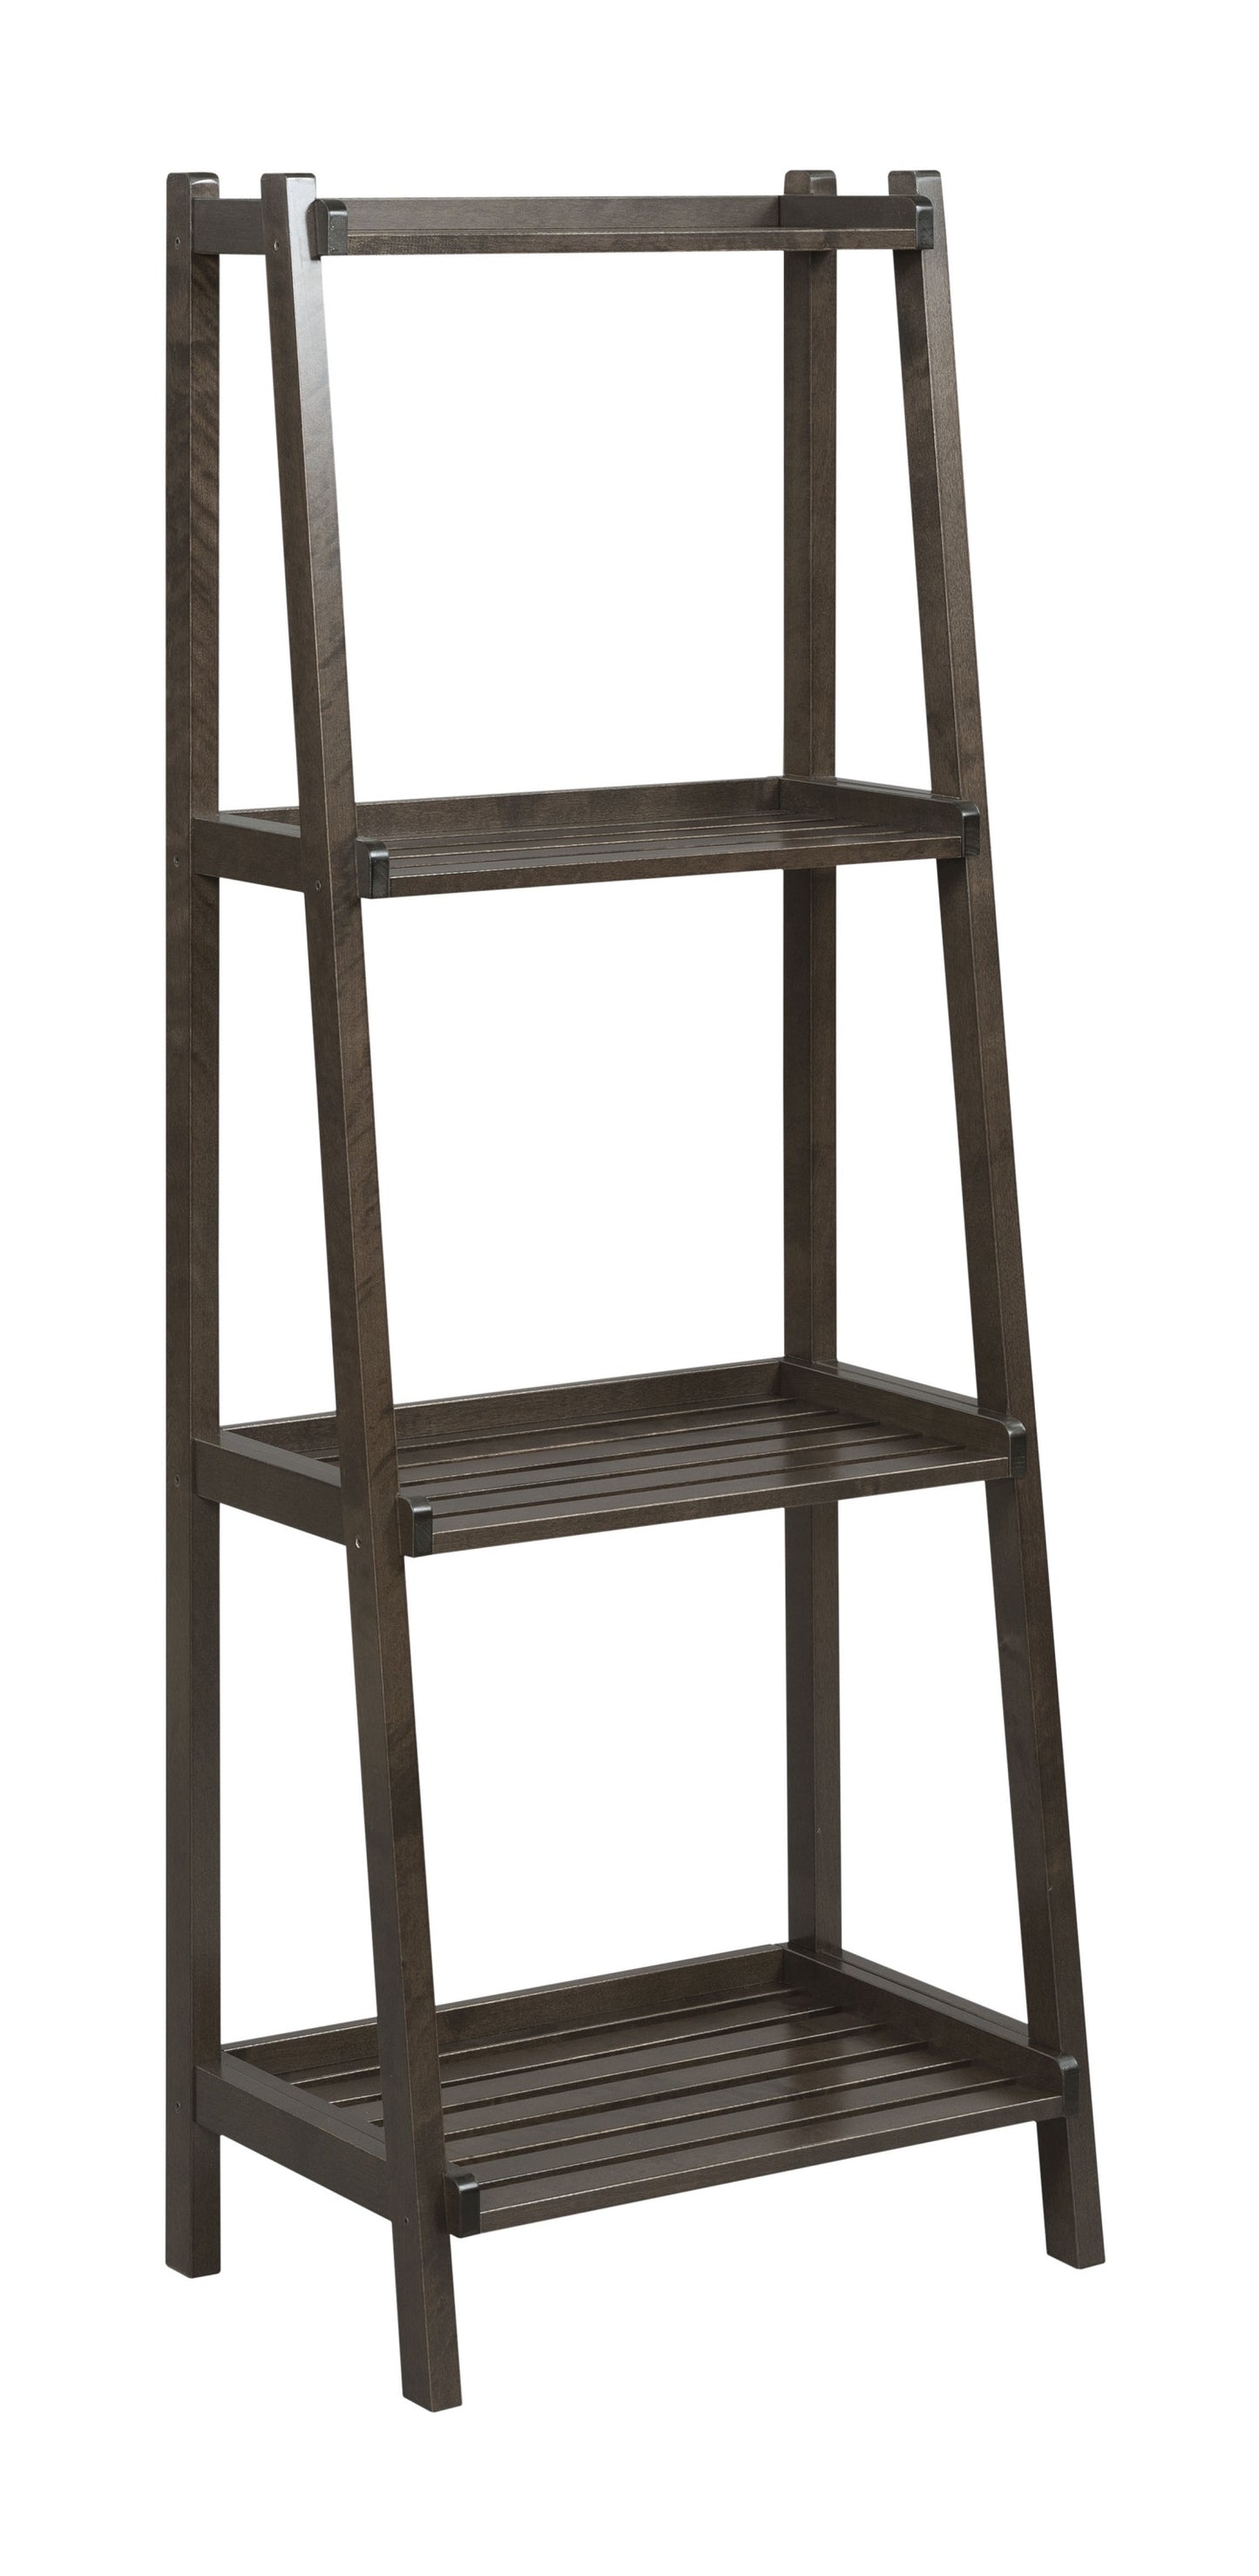 60" Ladder Bookcase With 4 Shelves In Espresso